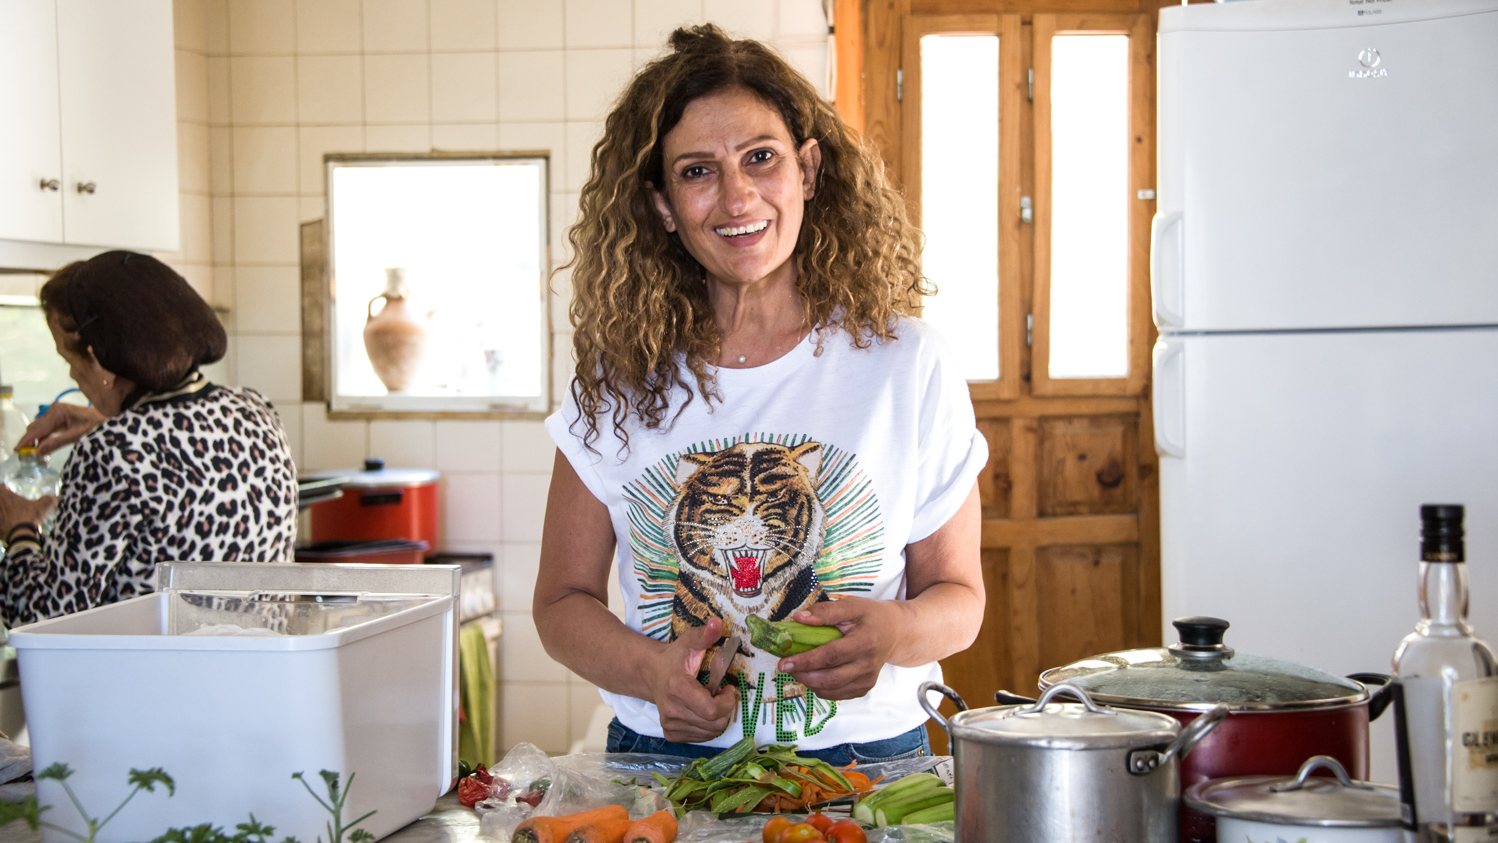 'Life is actually still functioning here more so than on the outside,' says Paula Wehbe from her well-lit home in Bchaaleh (MEE/Elizabeth Fitt)